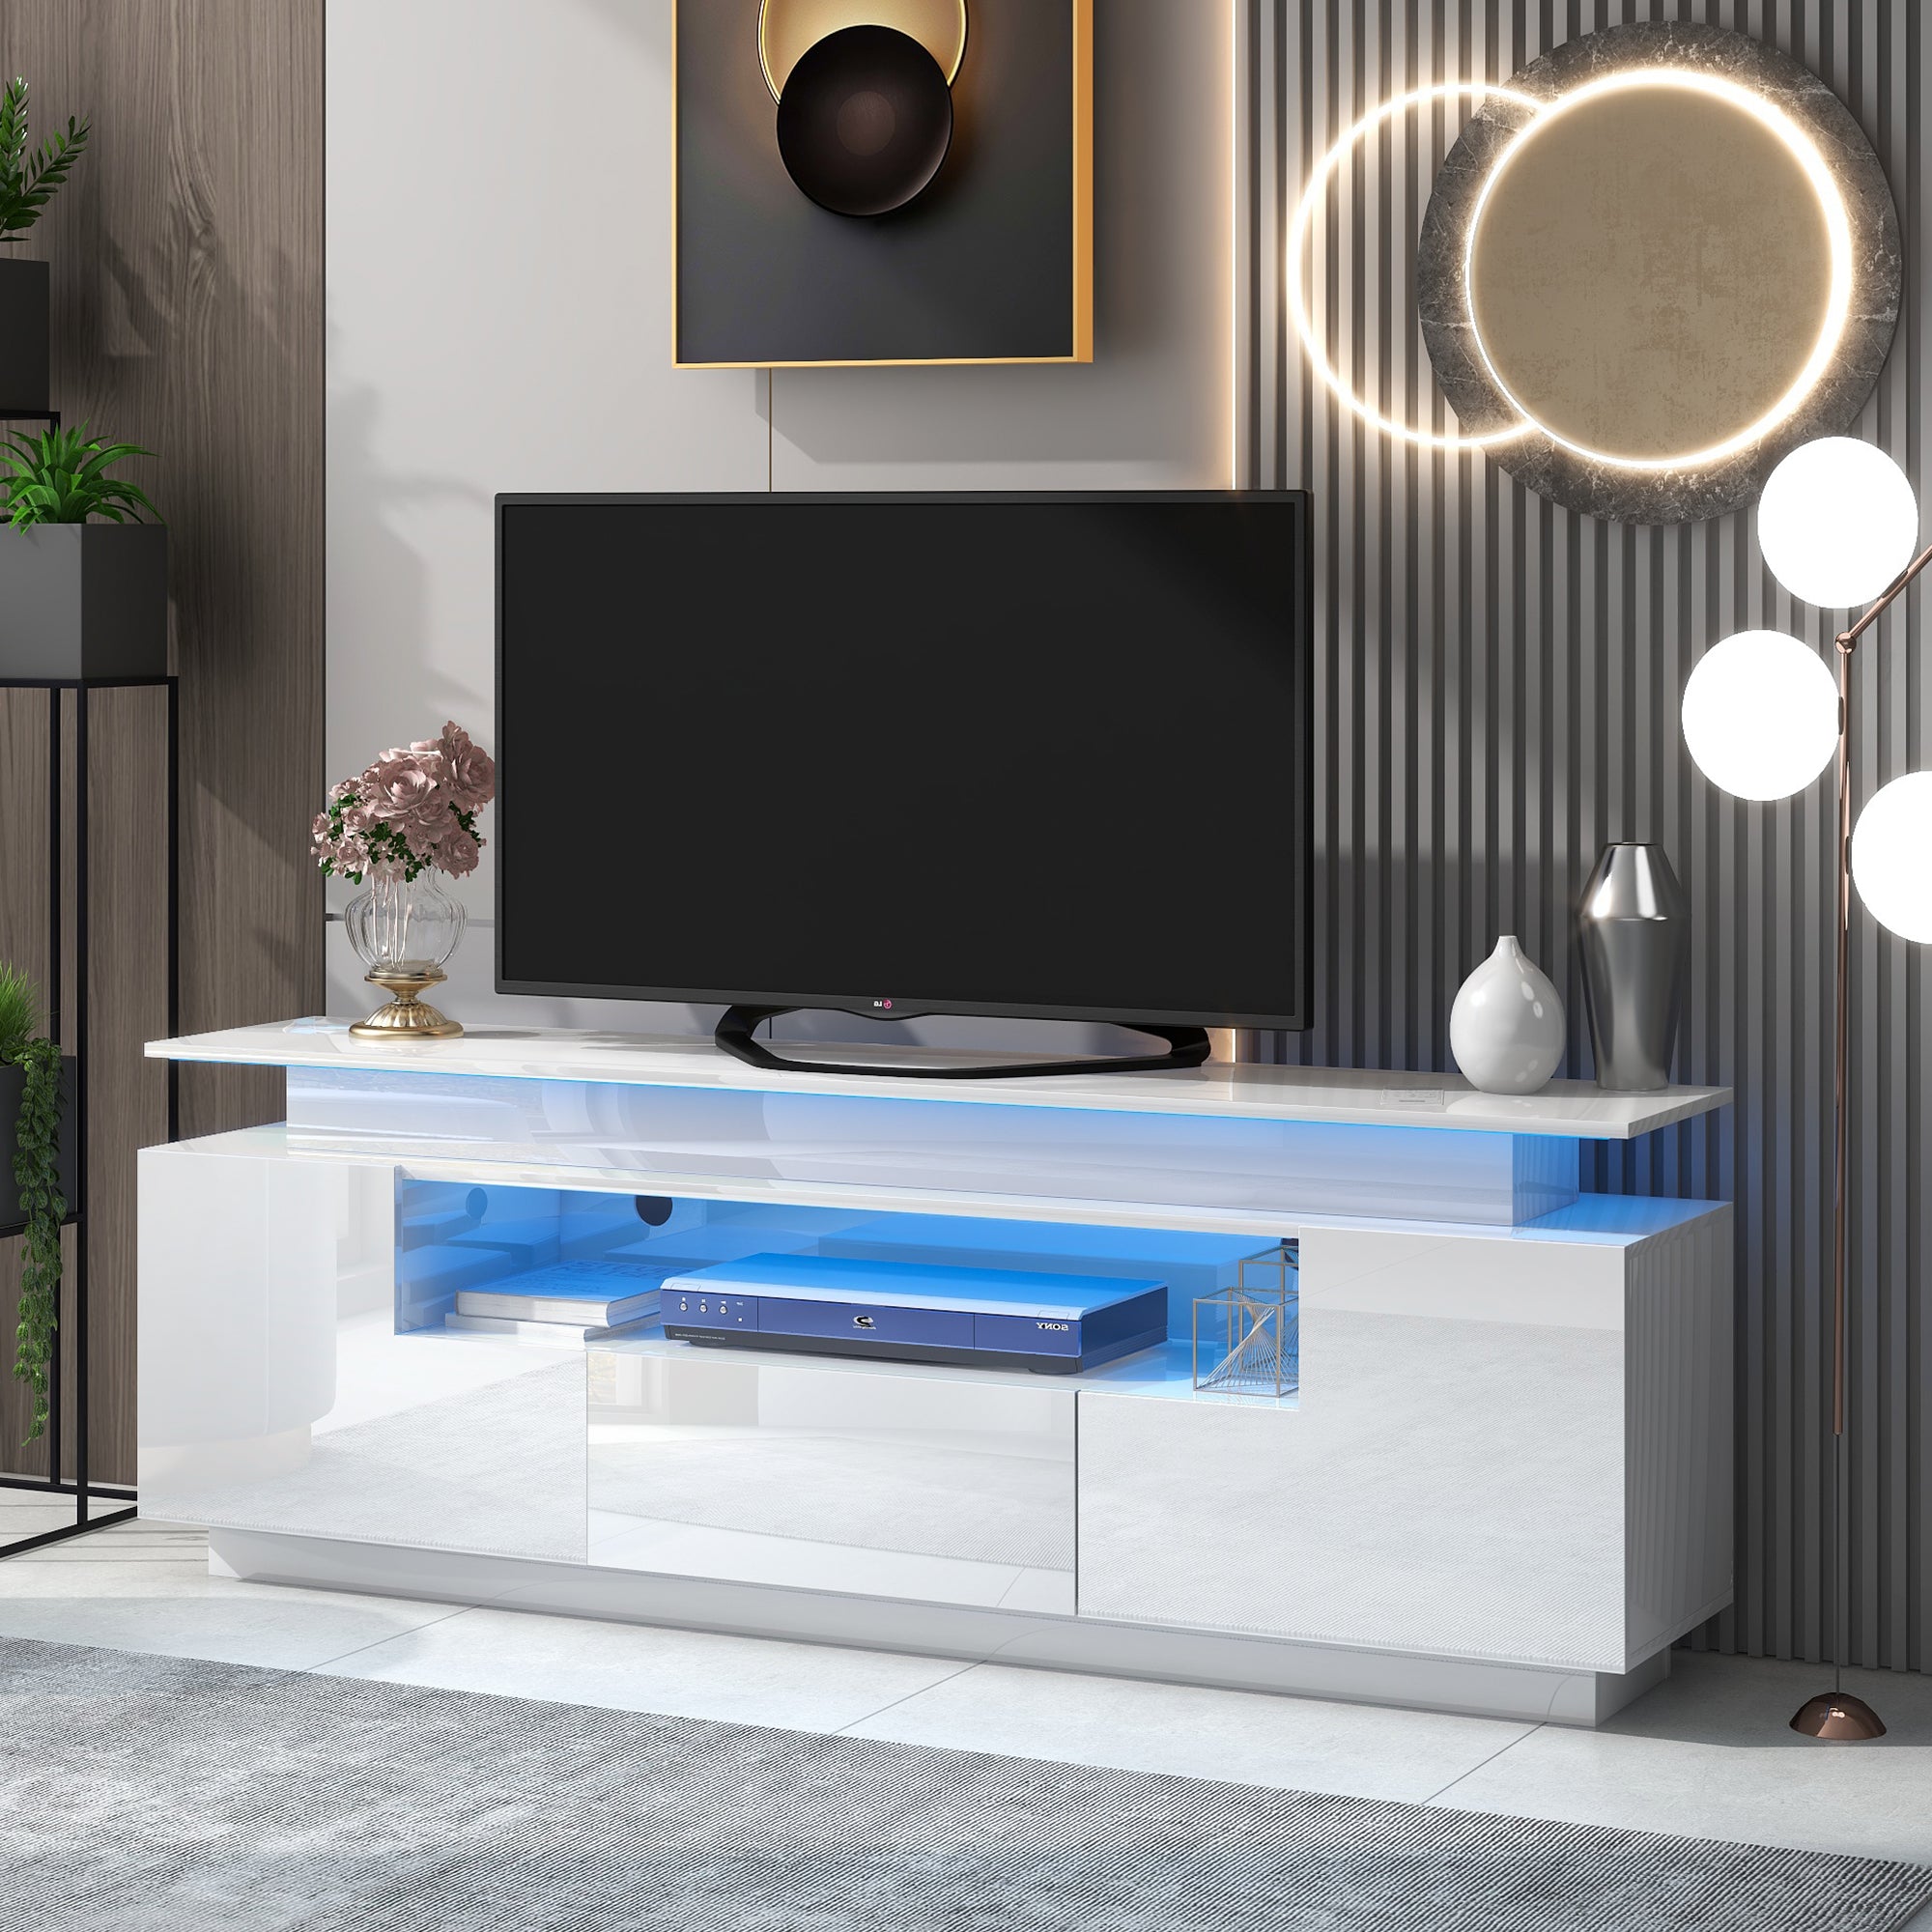 ON-TREND Modern, Stylish Functional TV Stand with Color Changing LED Lights, Universal Entertainment Center, High Gloss TV Cabinet for 75+ inch TV, White